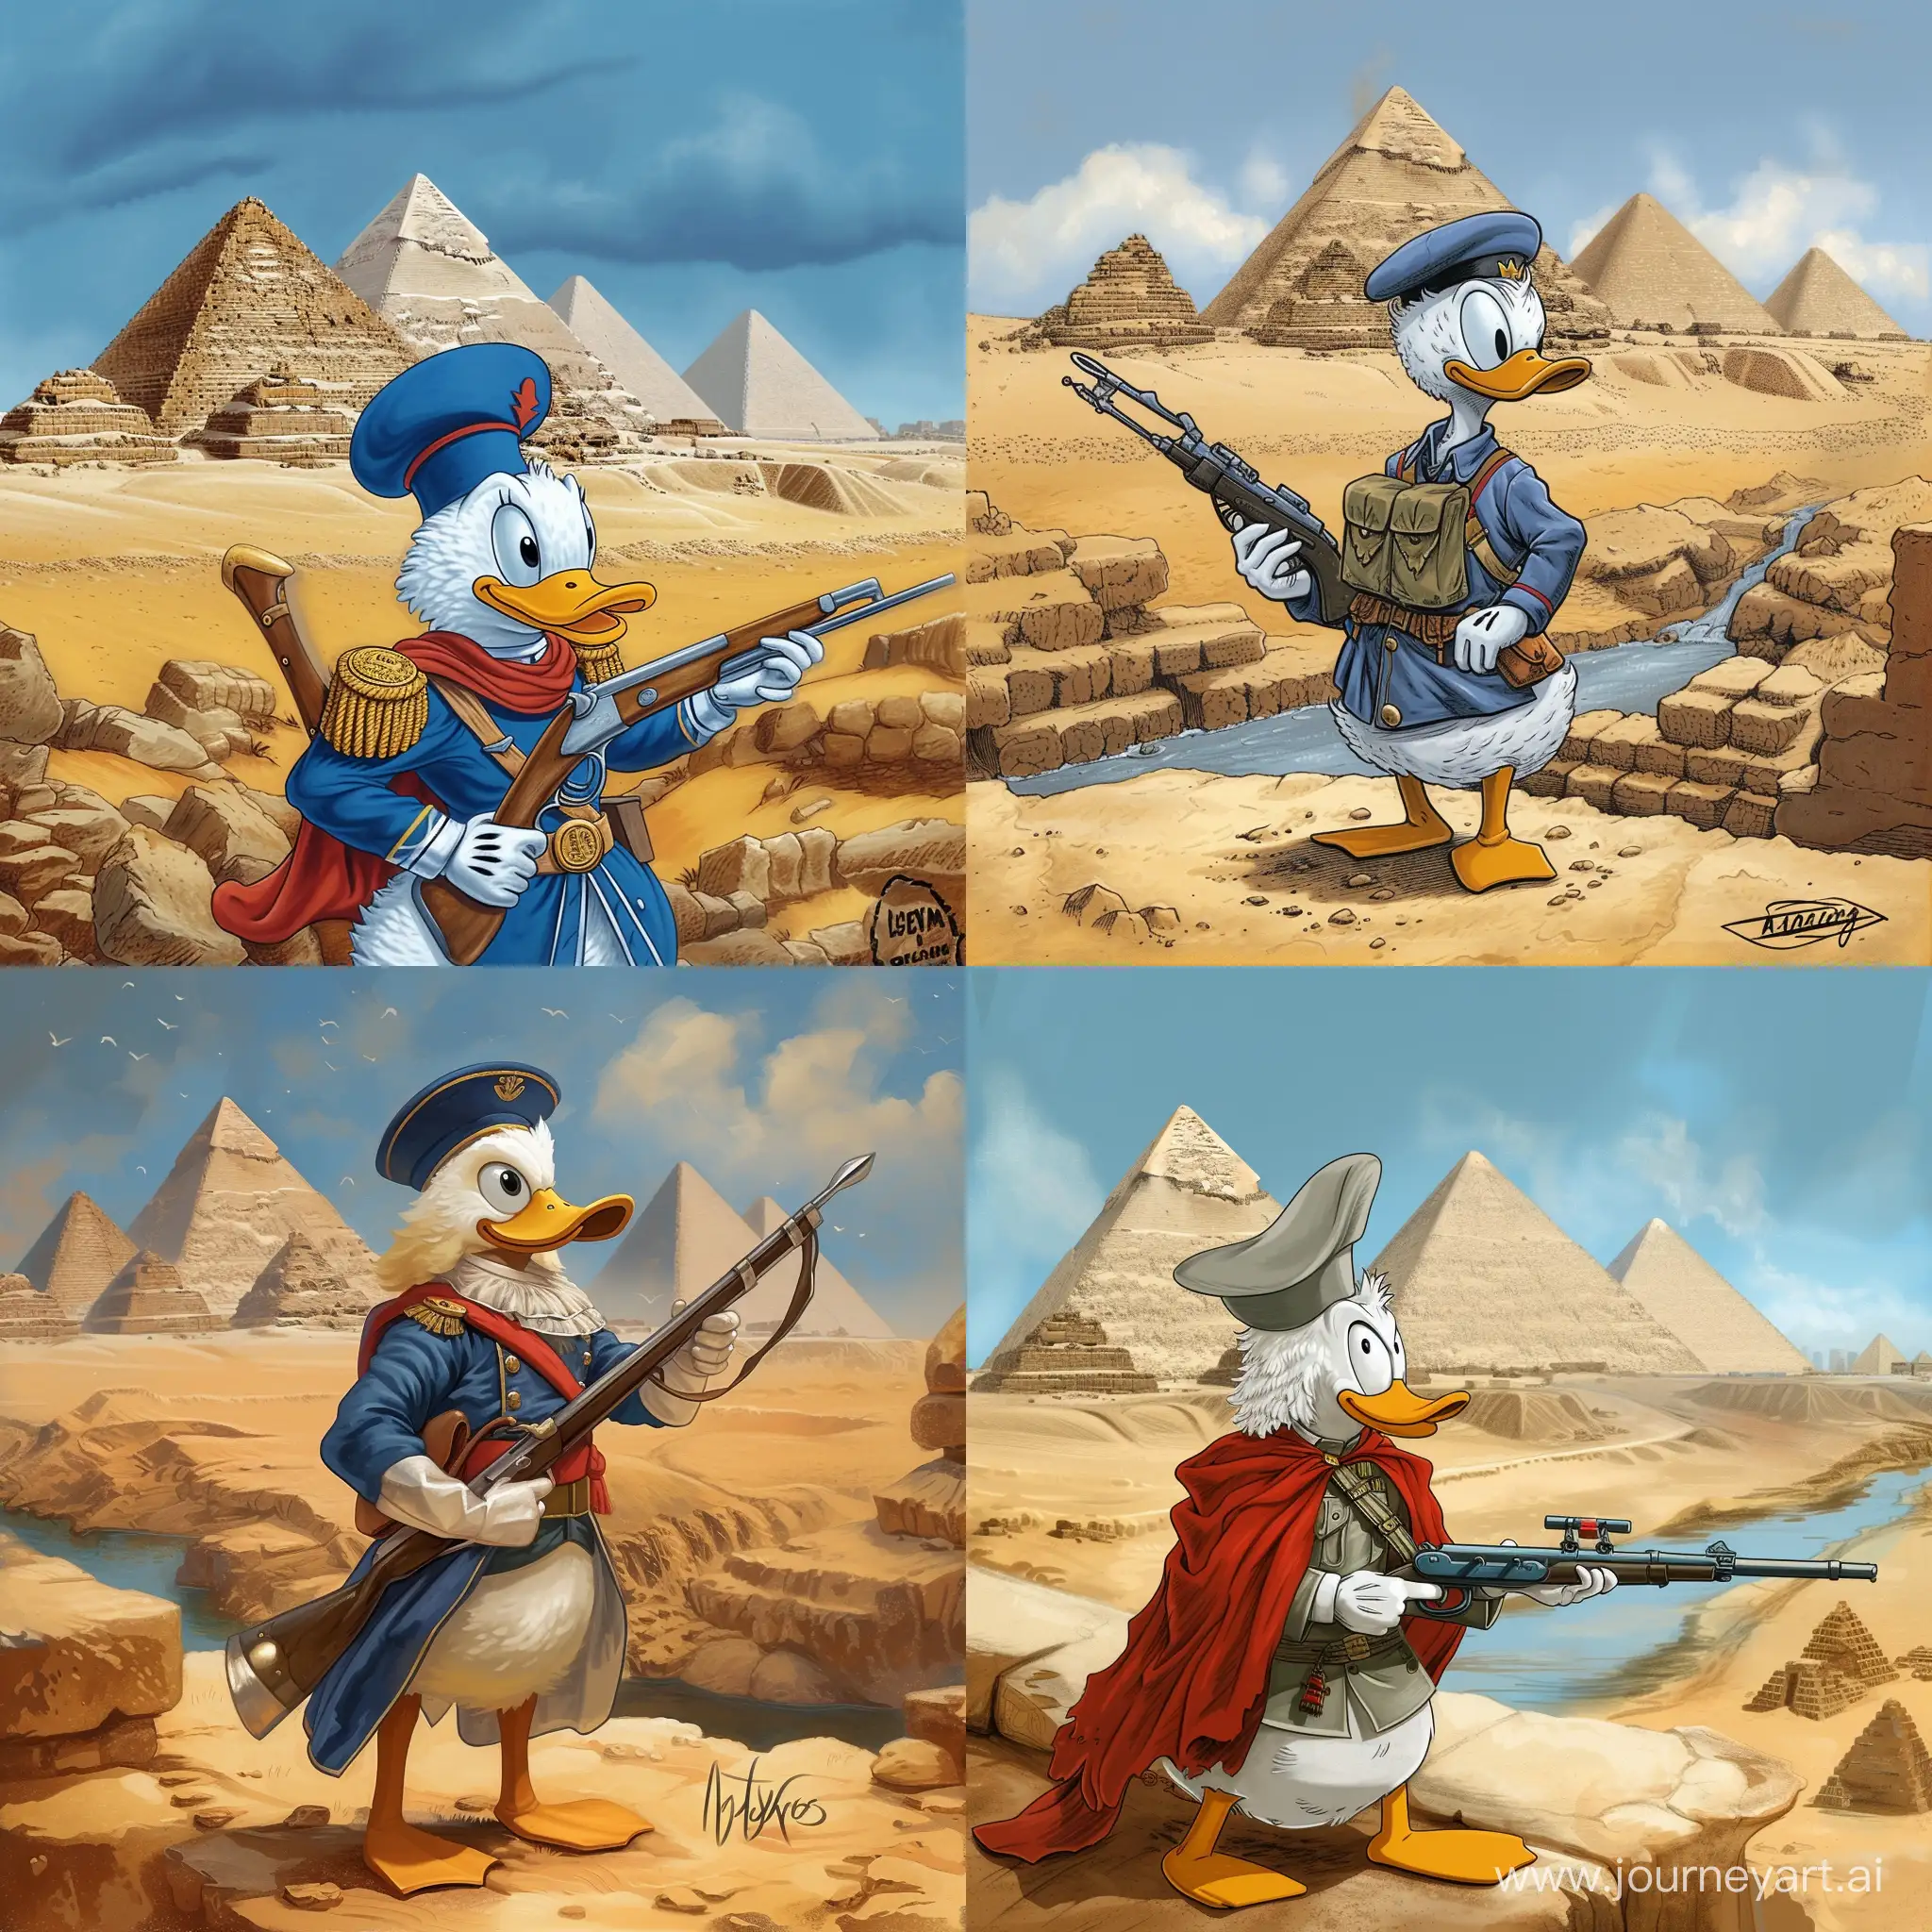 Napoleon-Donald-Duck-in-Egyptian-Campaign-with-Pyramids